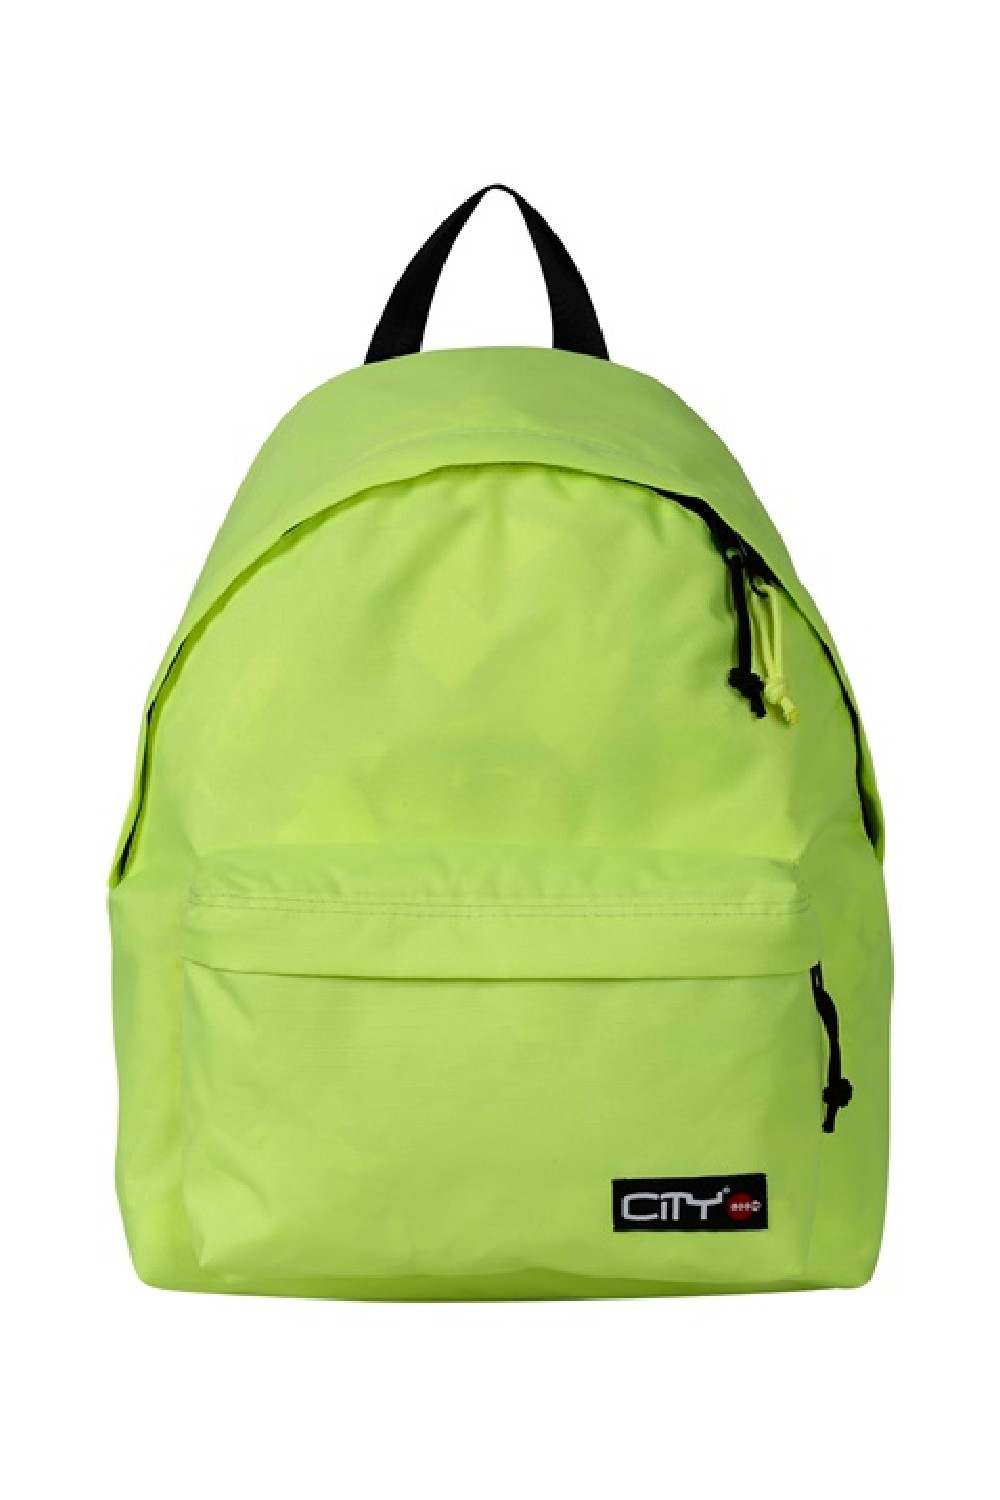 Cıty Fluo Yellow Backpack